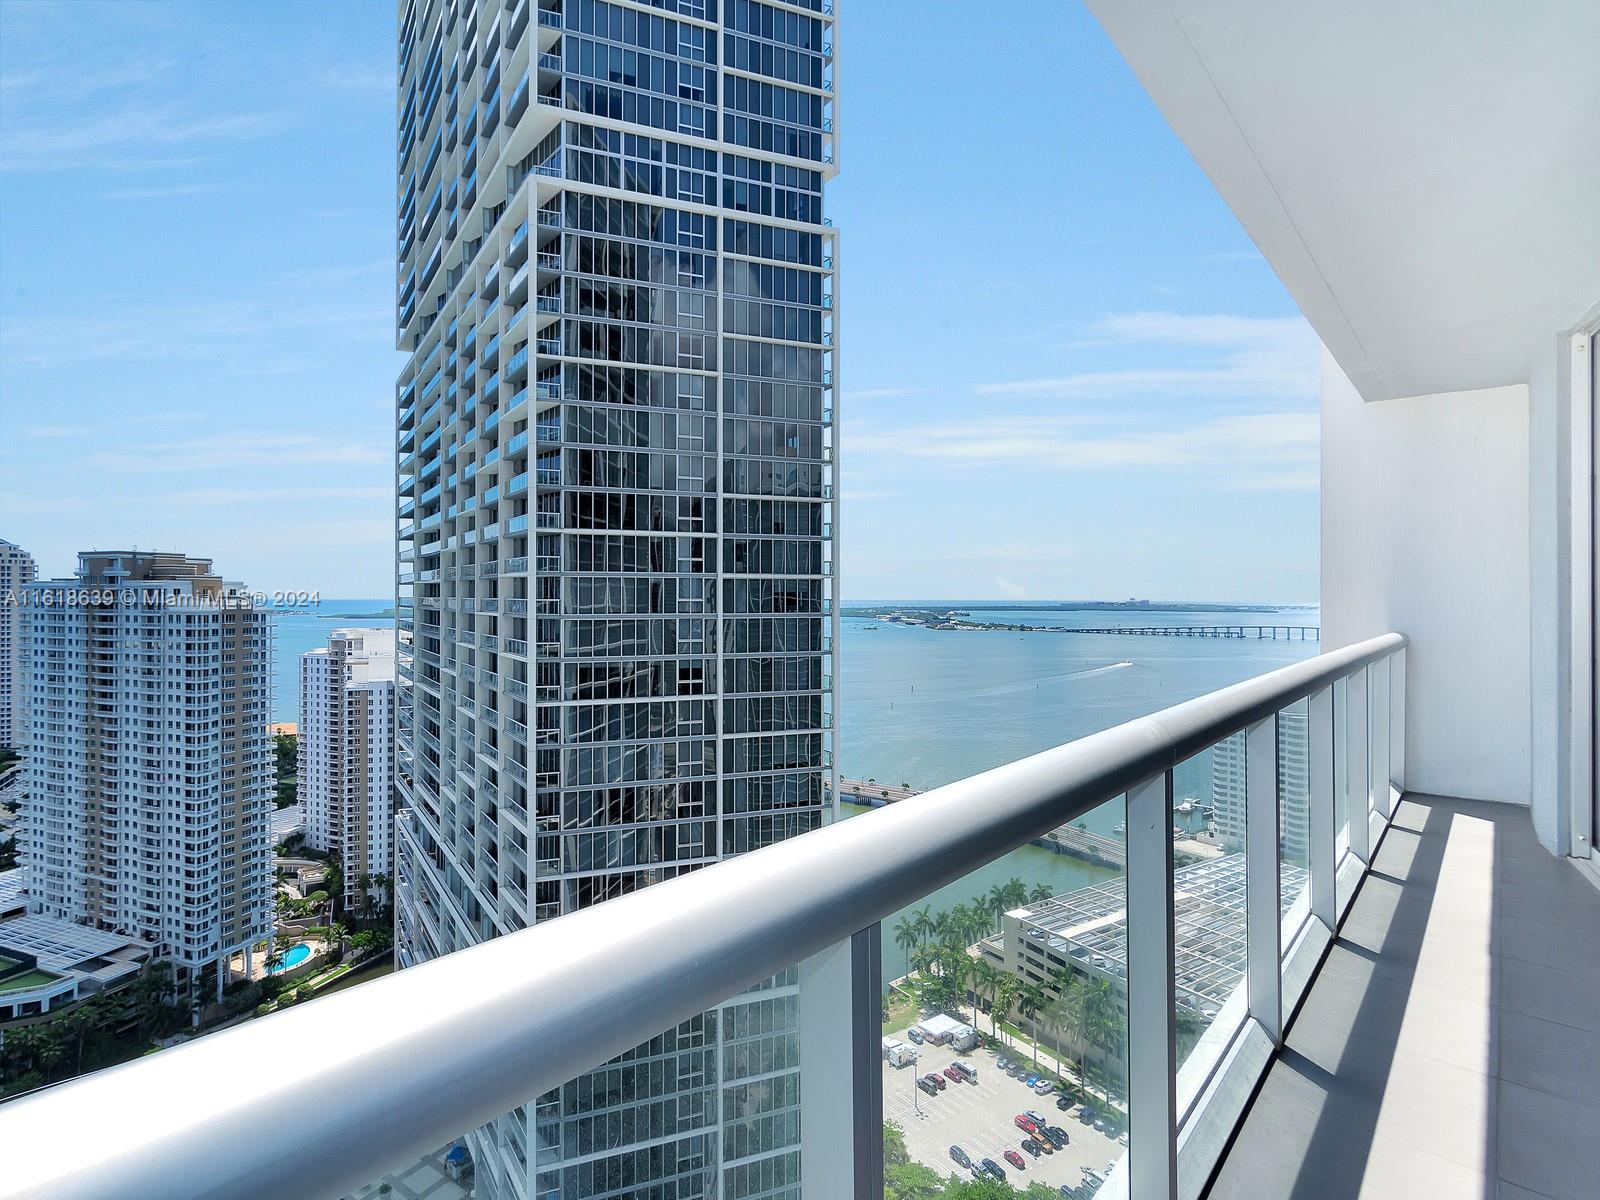 Experience luxurious living in this furnished 1-bedroom condo at Icon Brickell, offering stunning bay and river views. This modern unit features an open-concept living area with floor-to-ceiling windows, a state-of-the-art kitchen with Sub-Zero and Wolf appliances, and a spacious bedroom with balcony access. Enjoy the unparalleled amenities designed by Philippe Starck, including a two-acre pool terrace with three infinity-edge pools, a 28,000-square-foot spa and fitness center, and multiple on-site dining options like Cipriani and Cantina La Veinte. This condo combines urban convenience with resort-style living and is minutes from Brickell City Centre and Mary Brickell Village. Basic cable and internet are included in the rent.